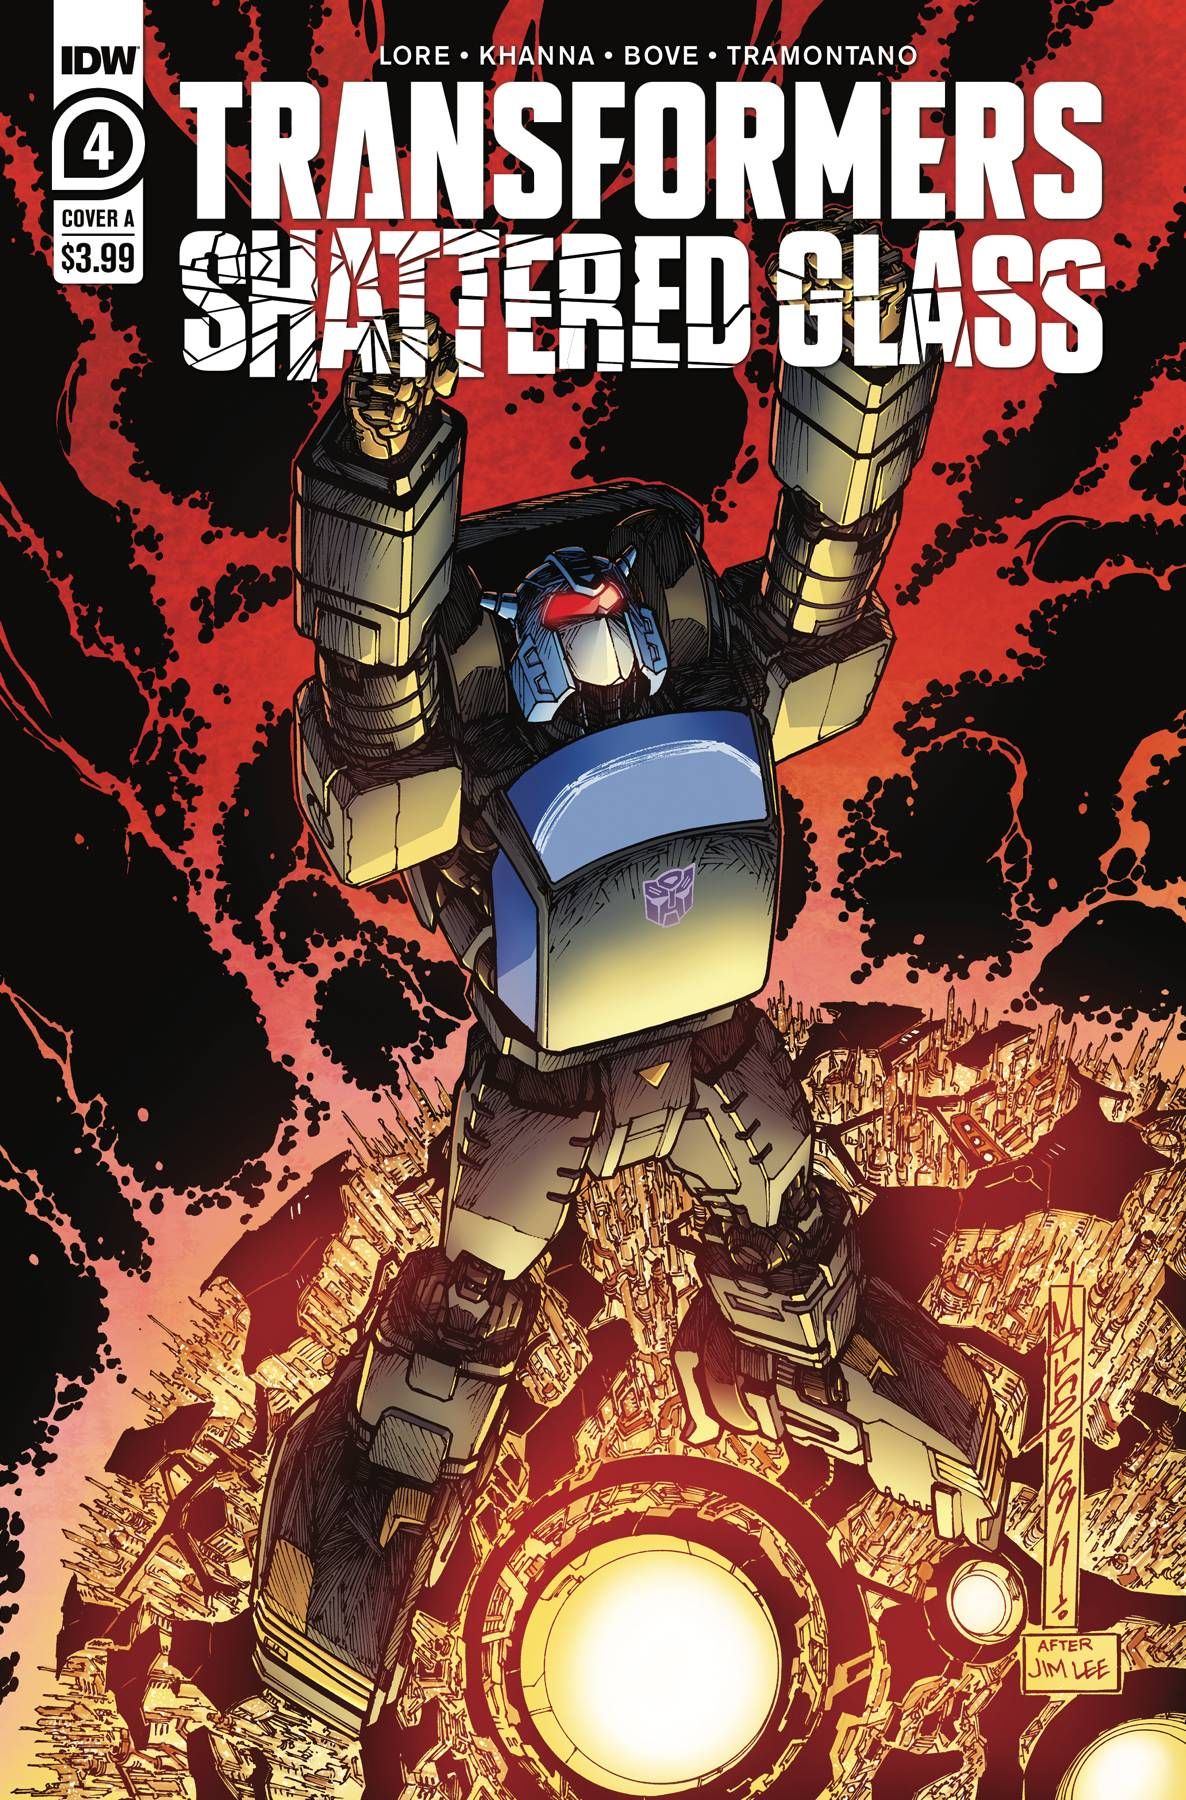 Transformers Shattered Glass #4 Comic